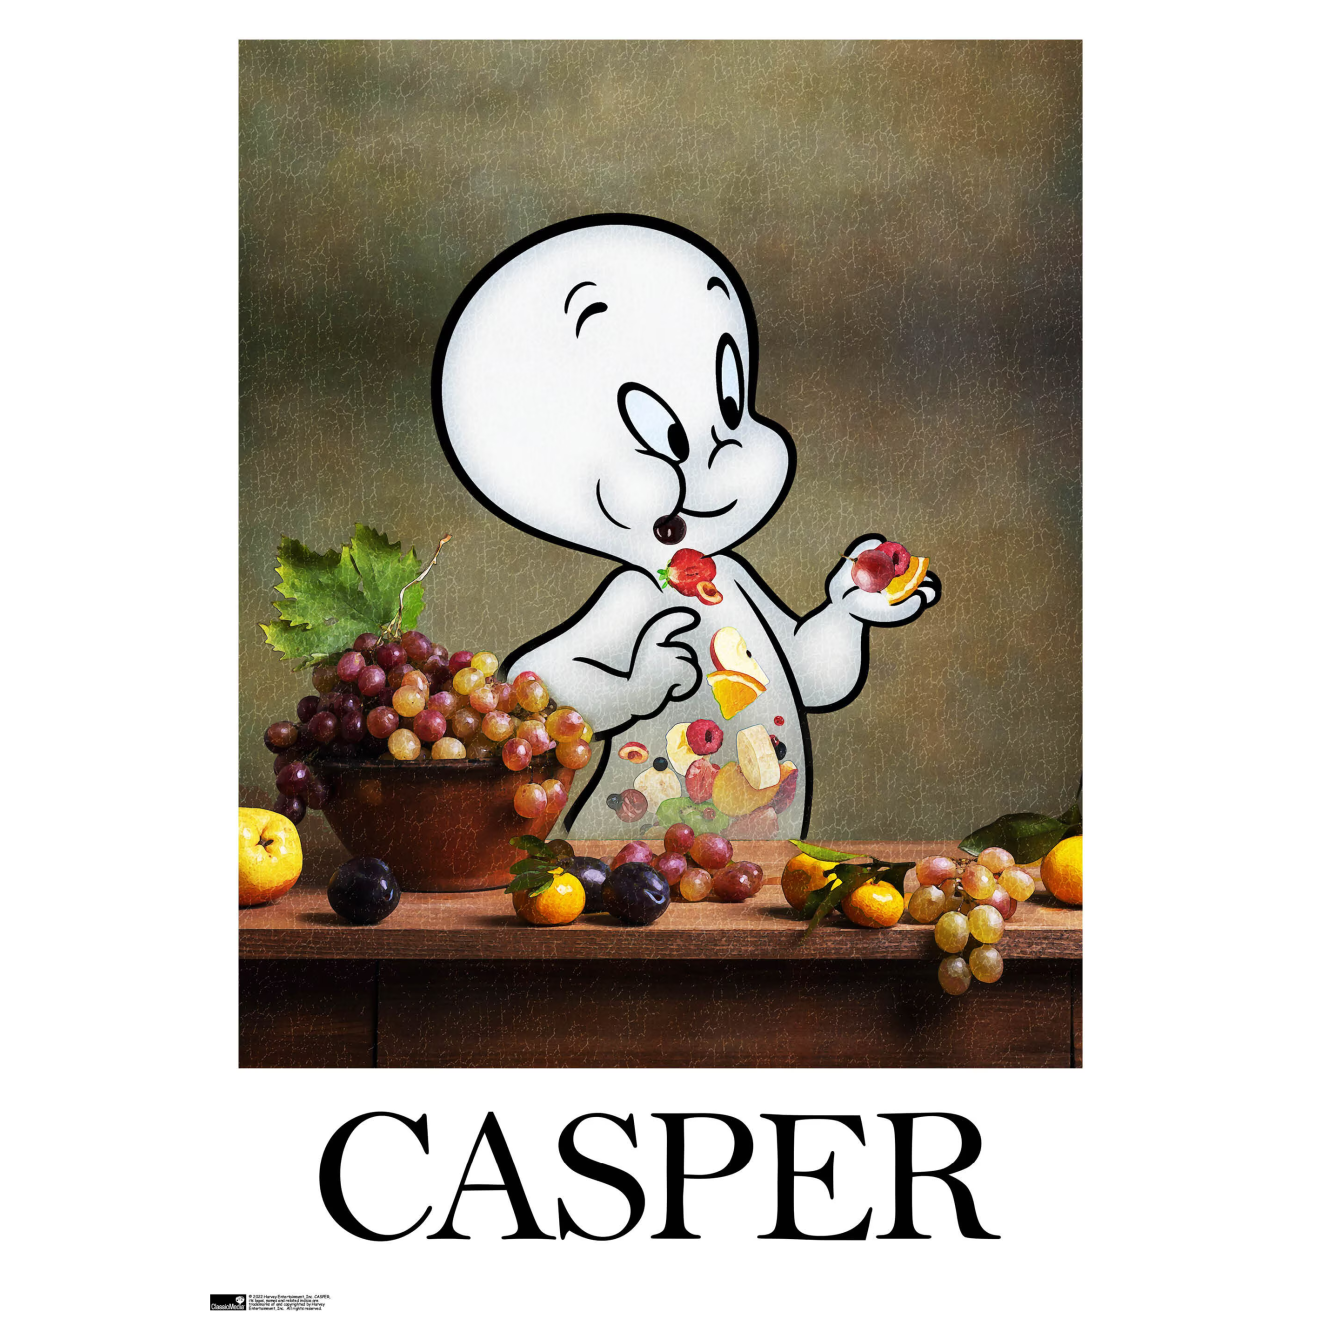 Casper - The Friendly Ghost Poster Painting